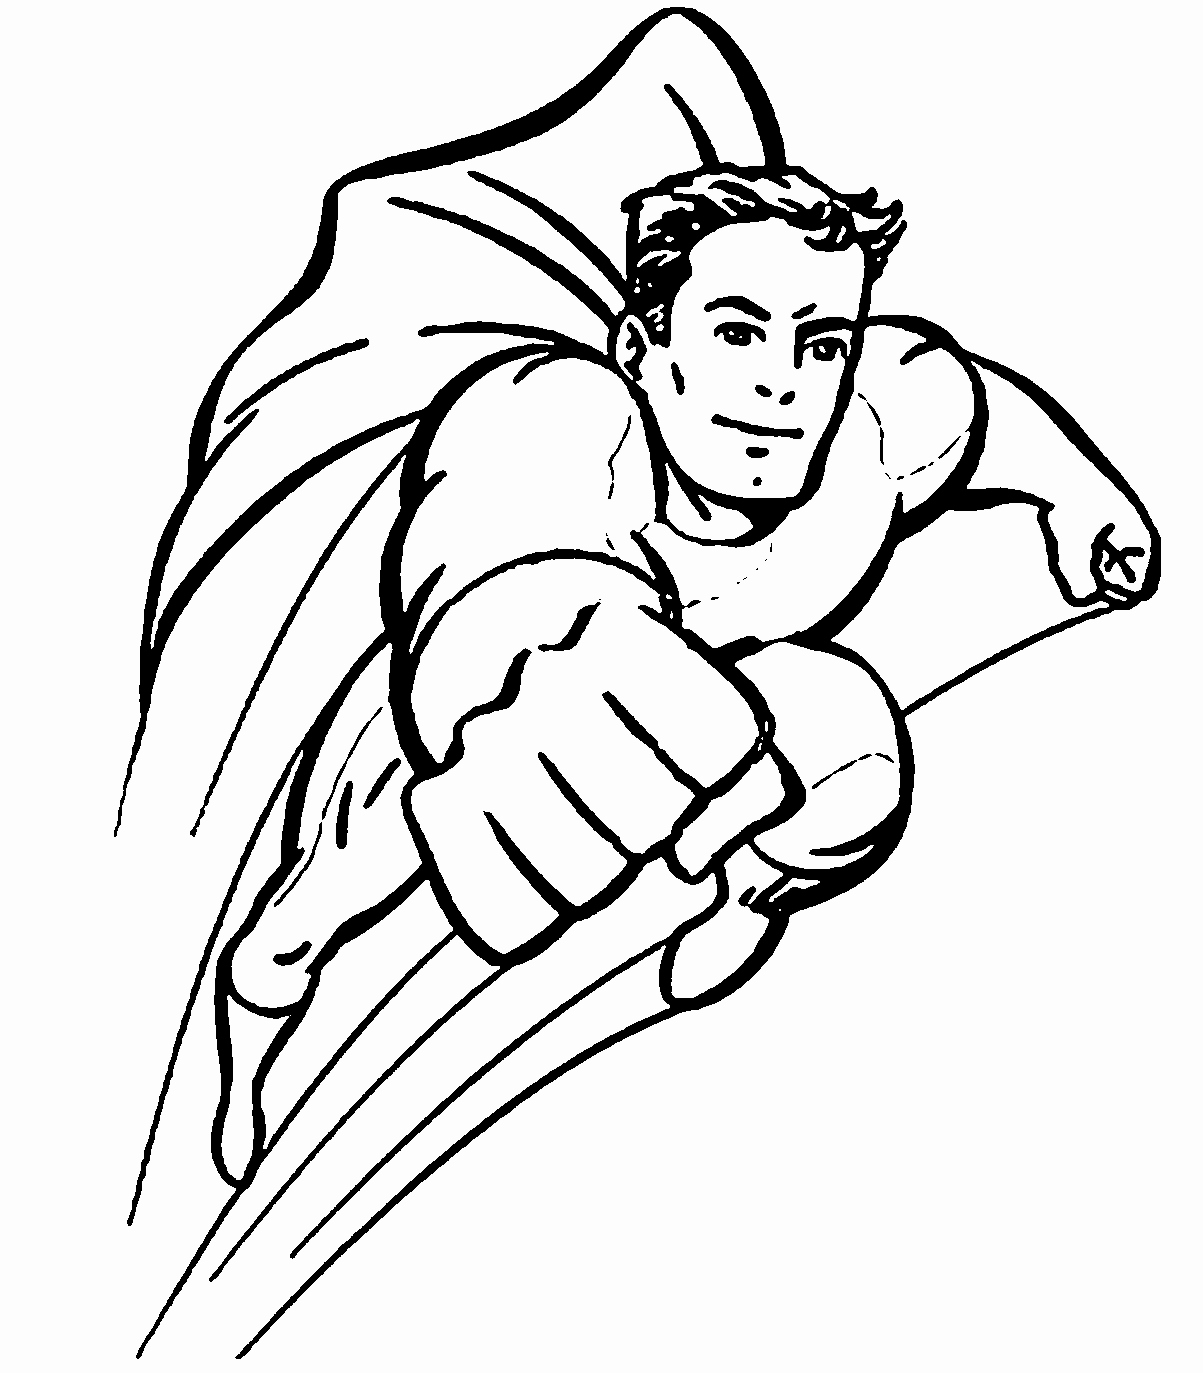 Super Hero Coloring Page Best Of Desert Bus for Hope Blog